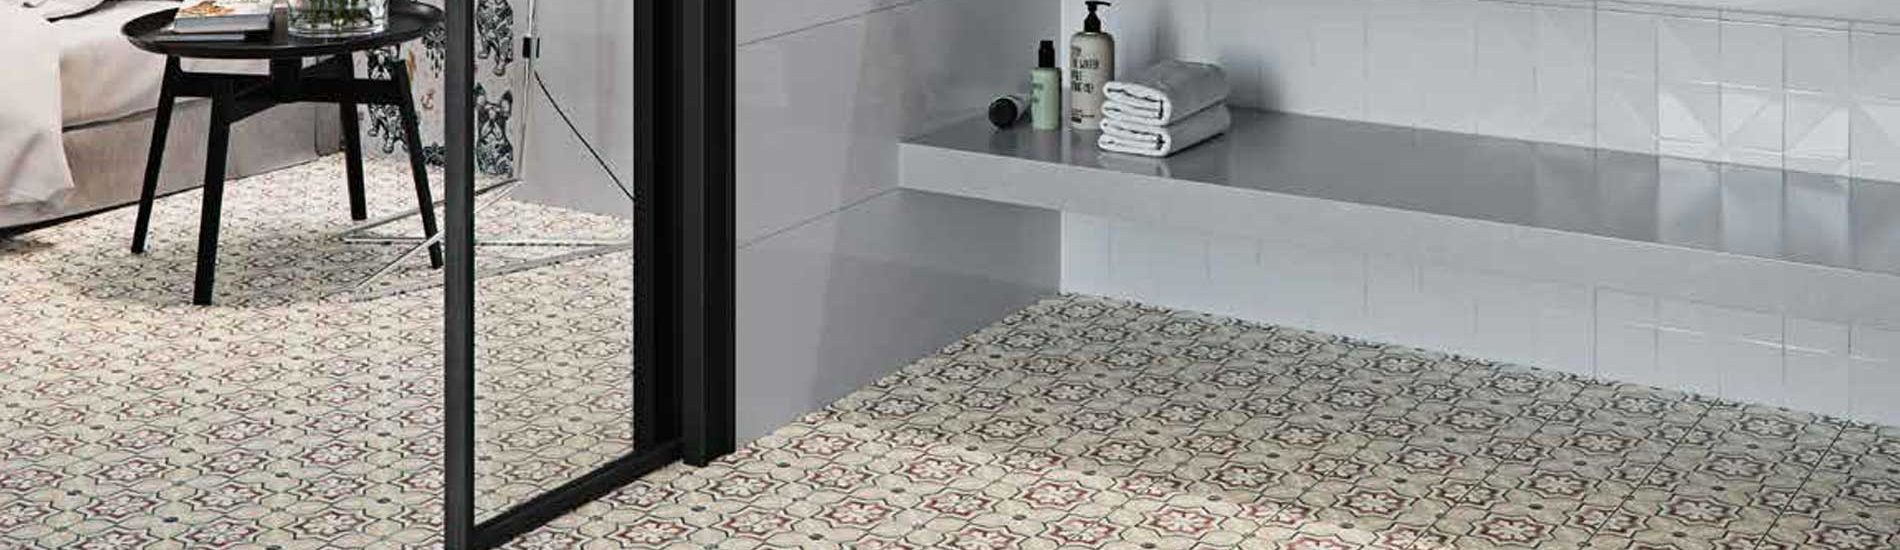 Sao Luis Cement Deco Spanish Floor Wall Tile Bv Tile And Stone